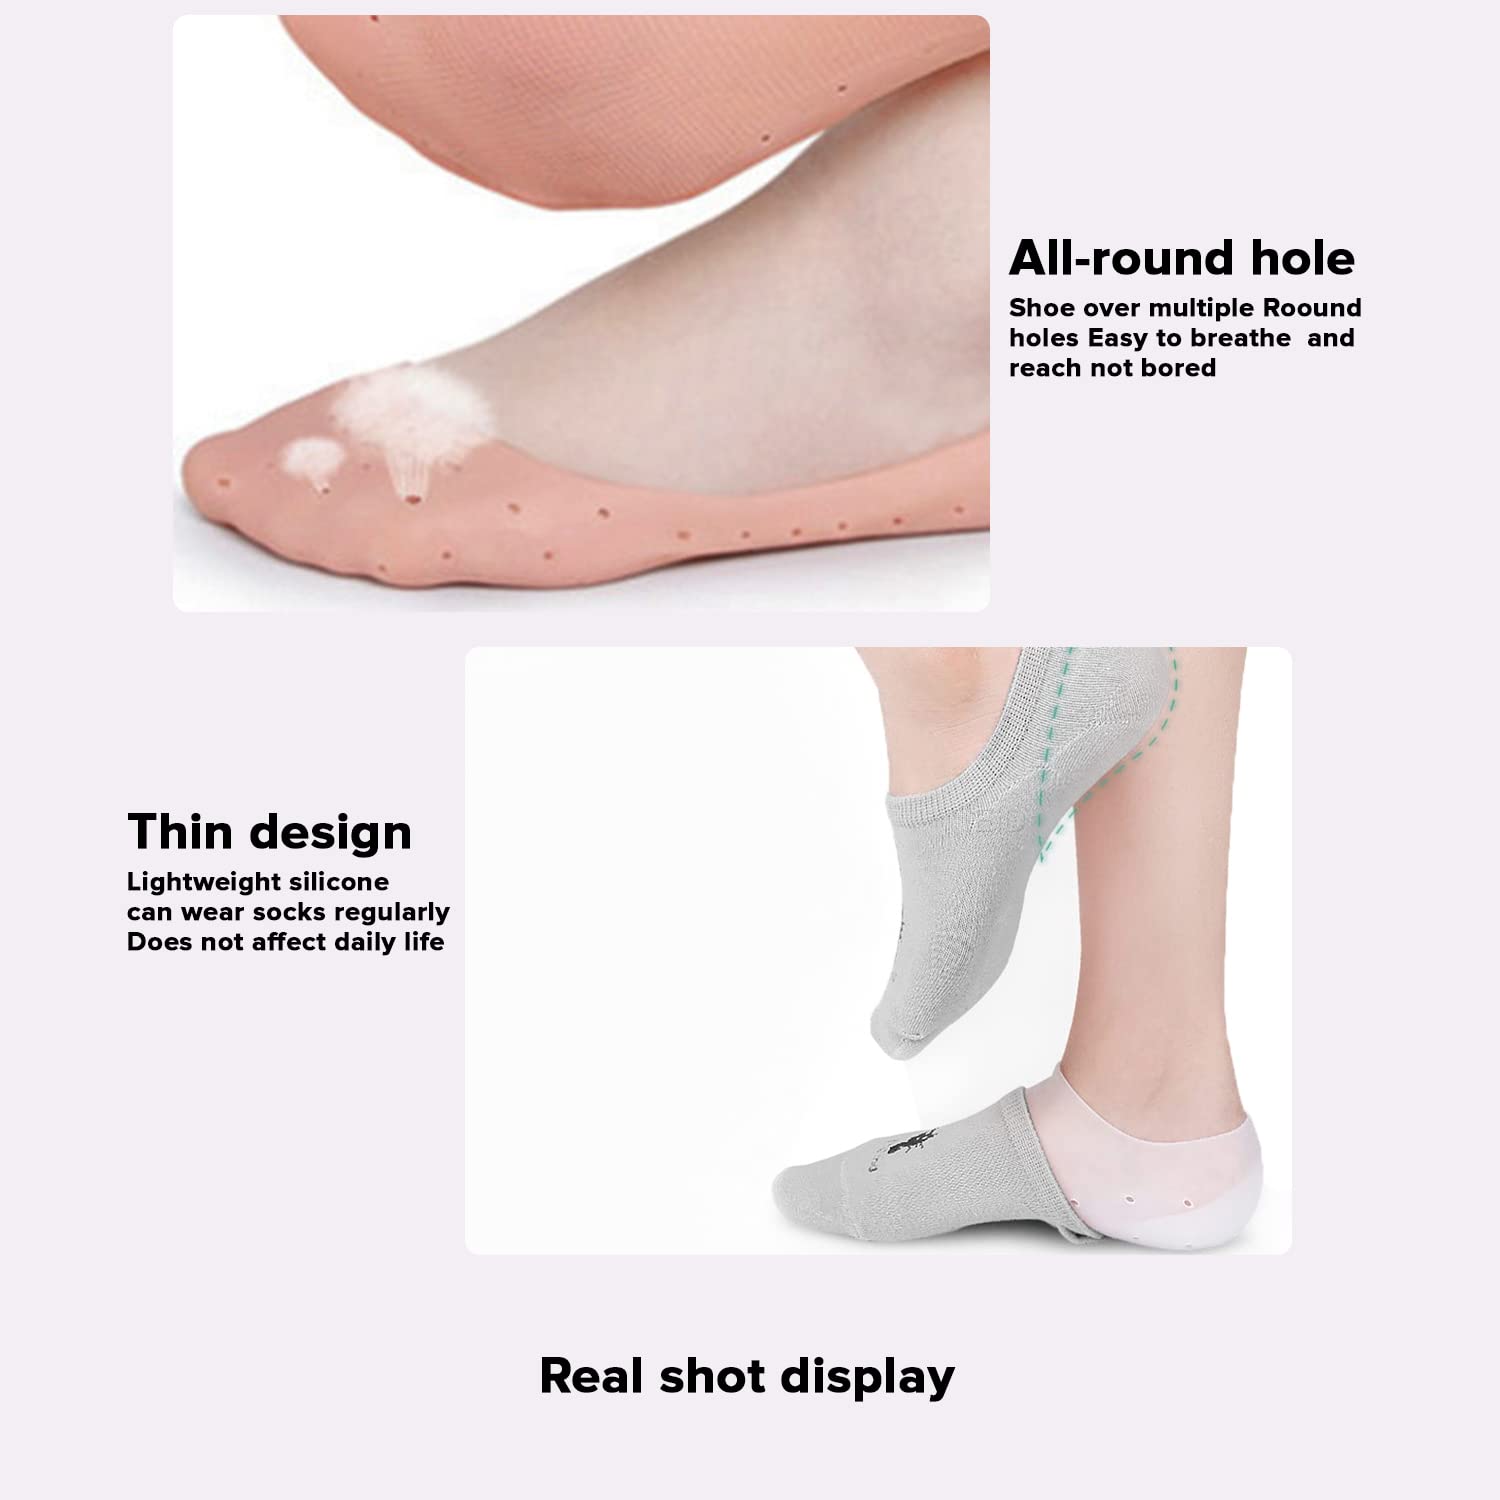 Dr Foot Silicone Moisturizing Heel Socks | For Dry, Cracked Heels, Rough Skin, Dead Skin, Calluses Remover | For Both Men & Women | Full Length, Large Size – 1 Pair (Pack of 10)